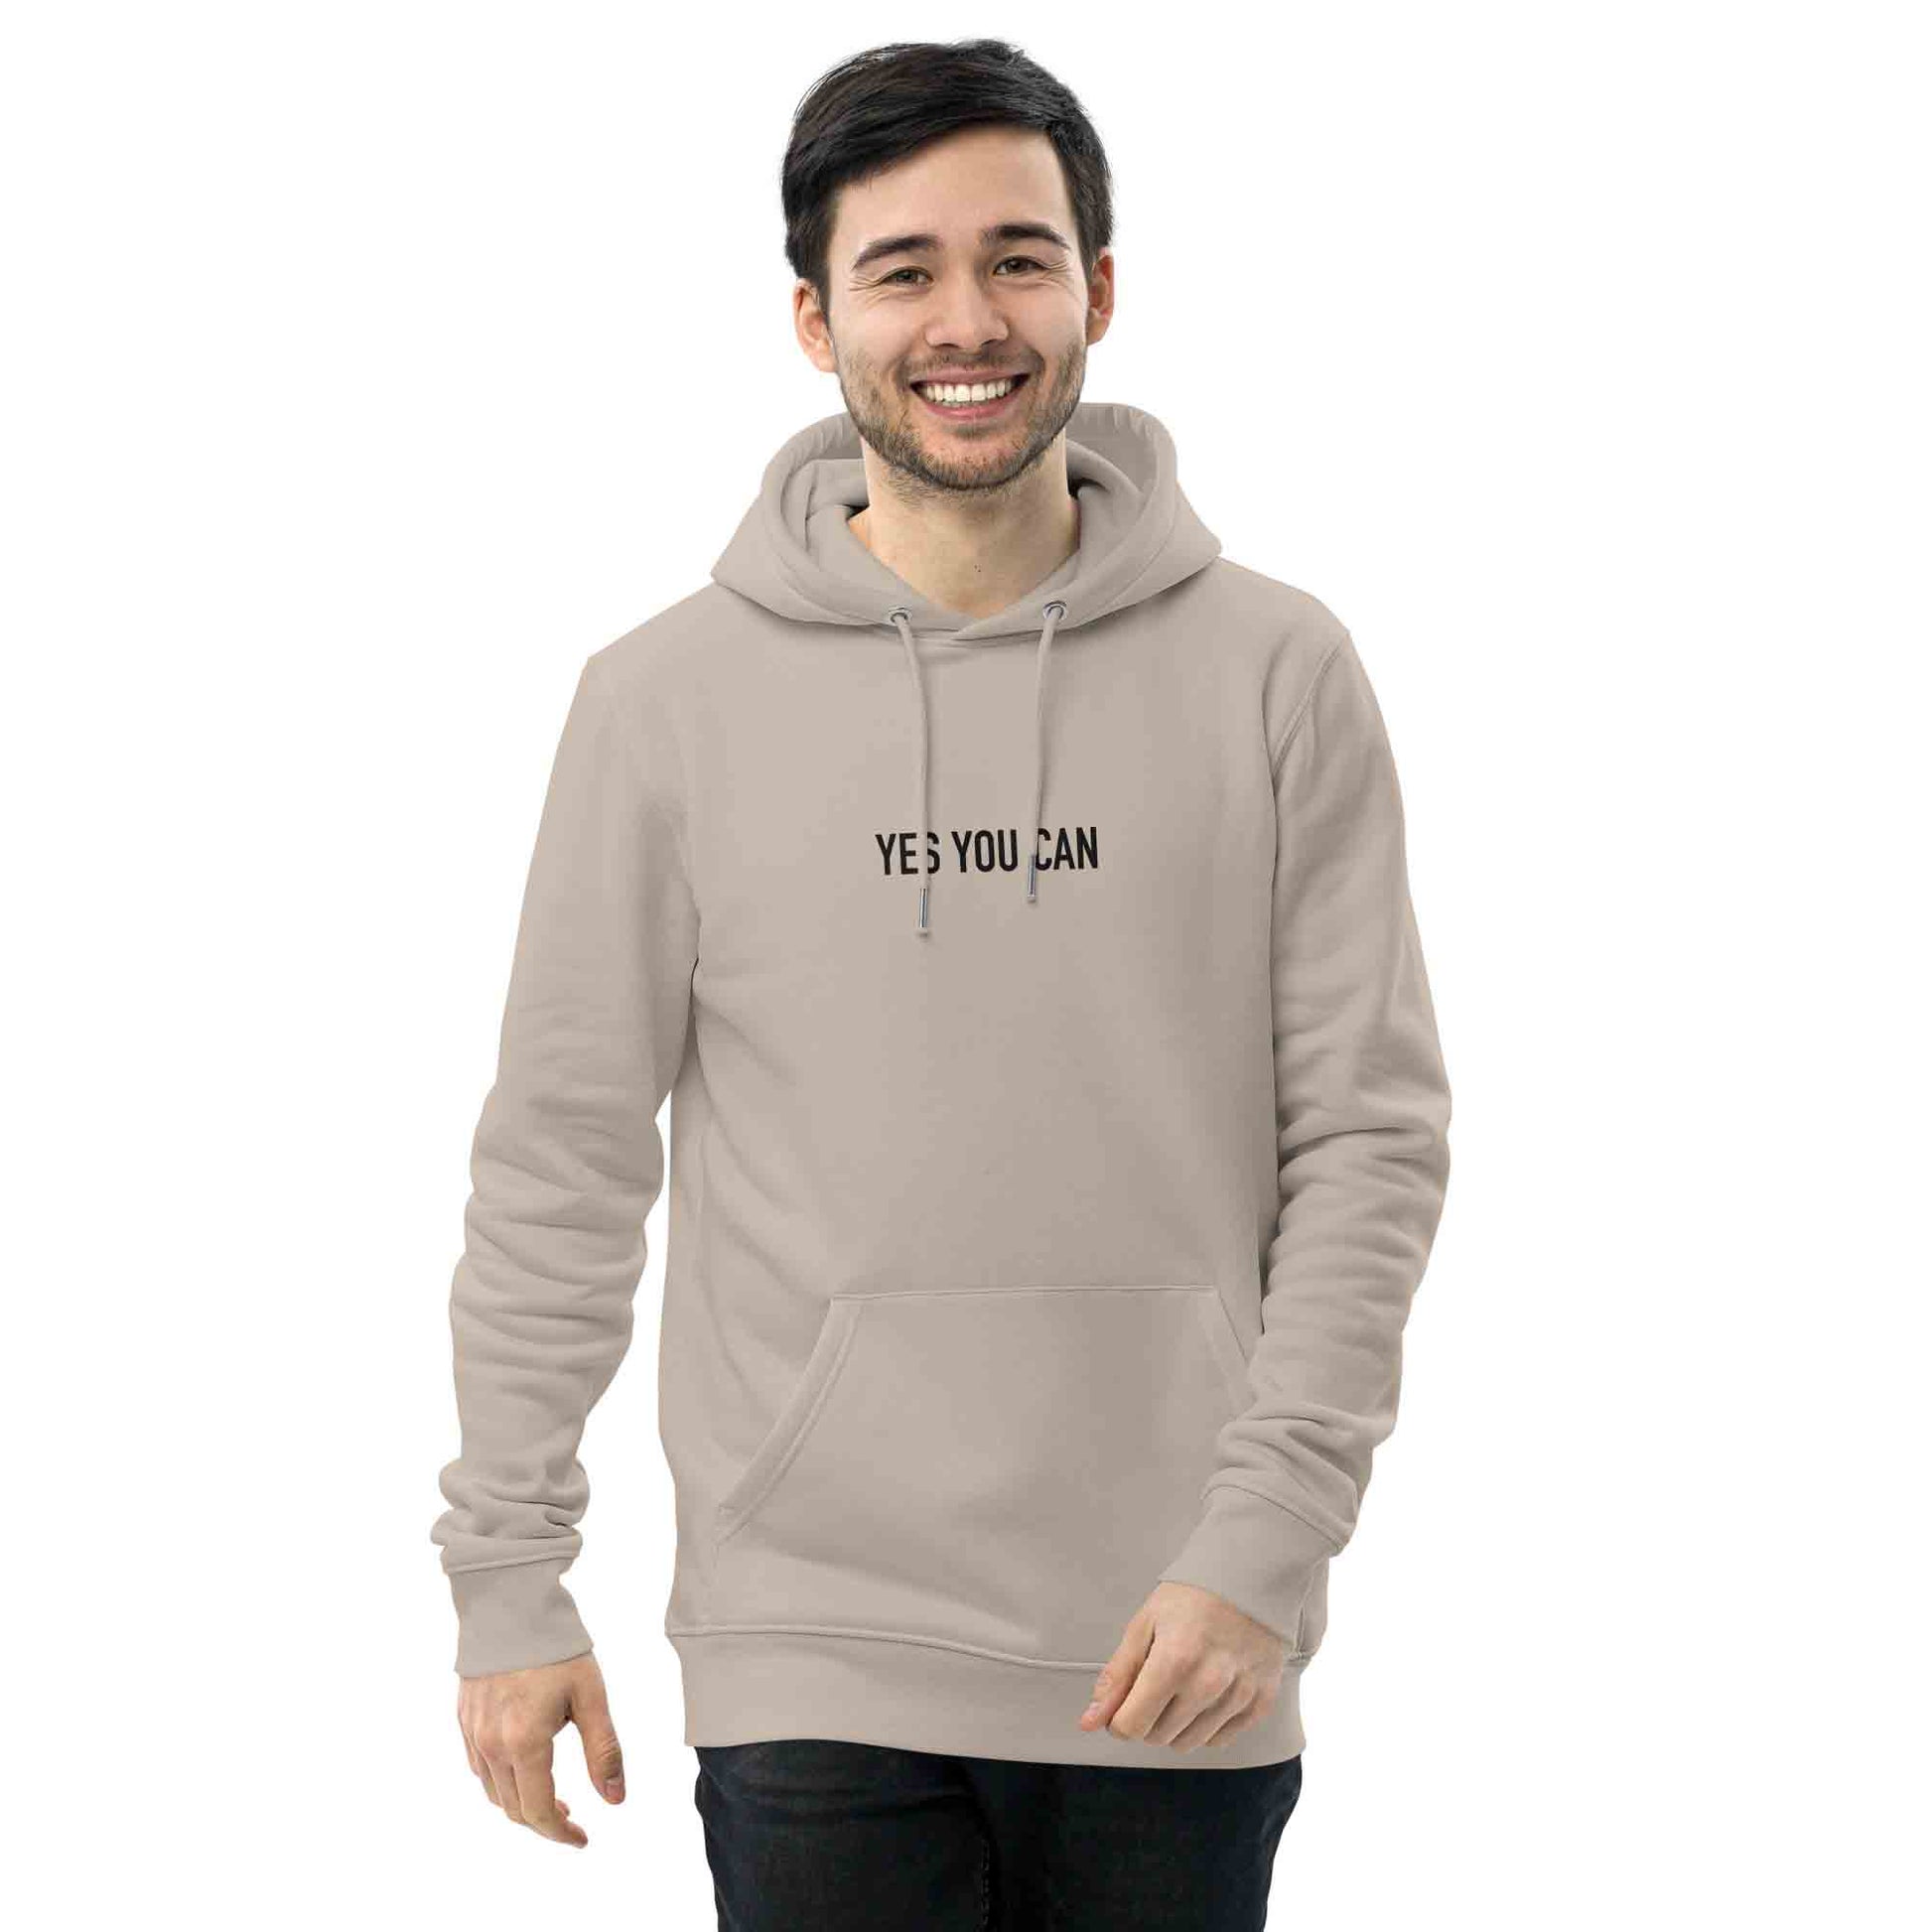 Men beige motivational hoodie with inspirational quote, "Yes You Can."